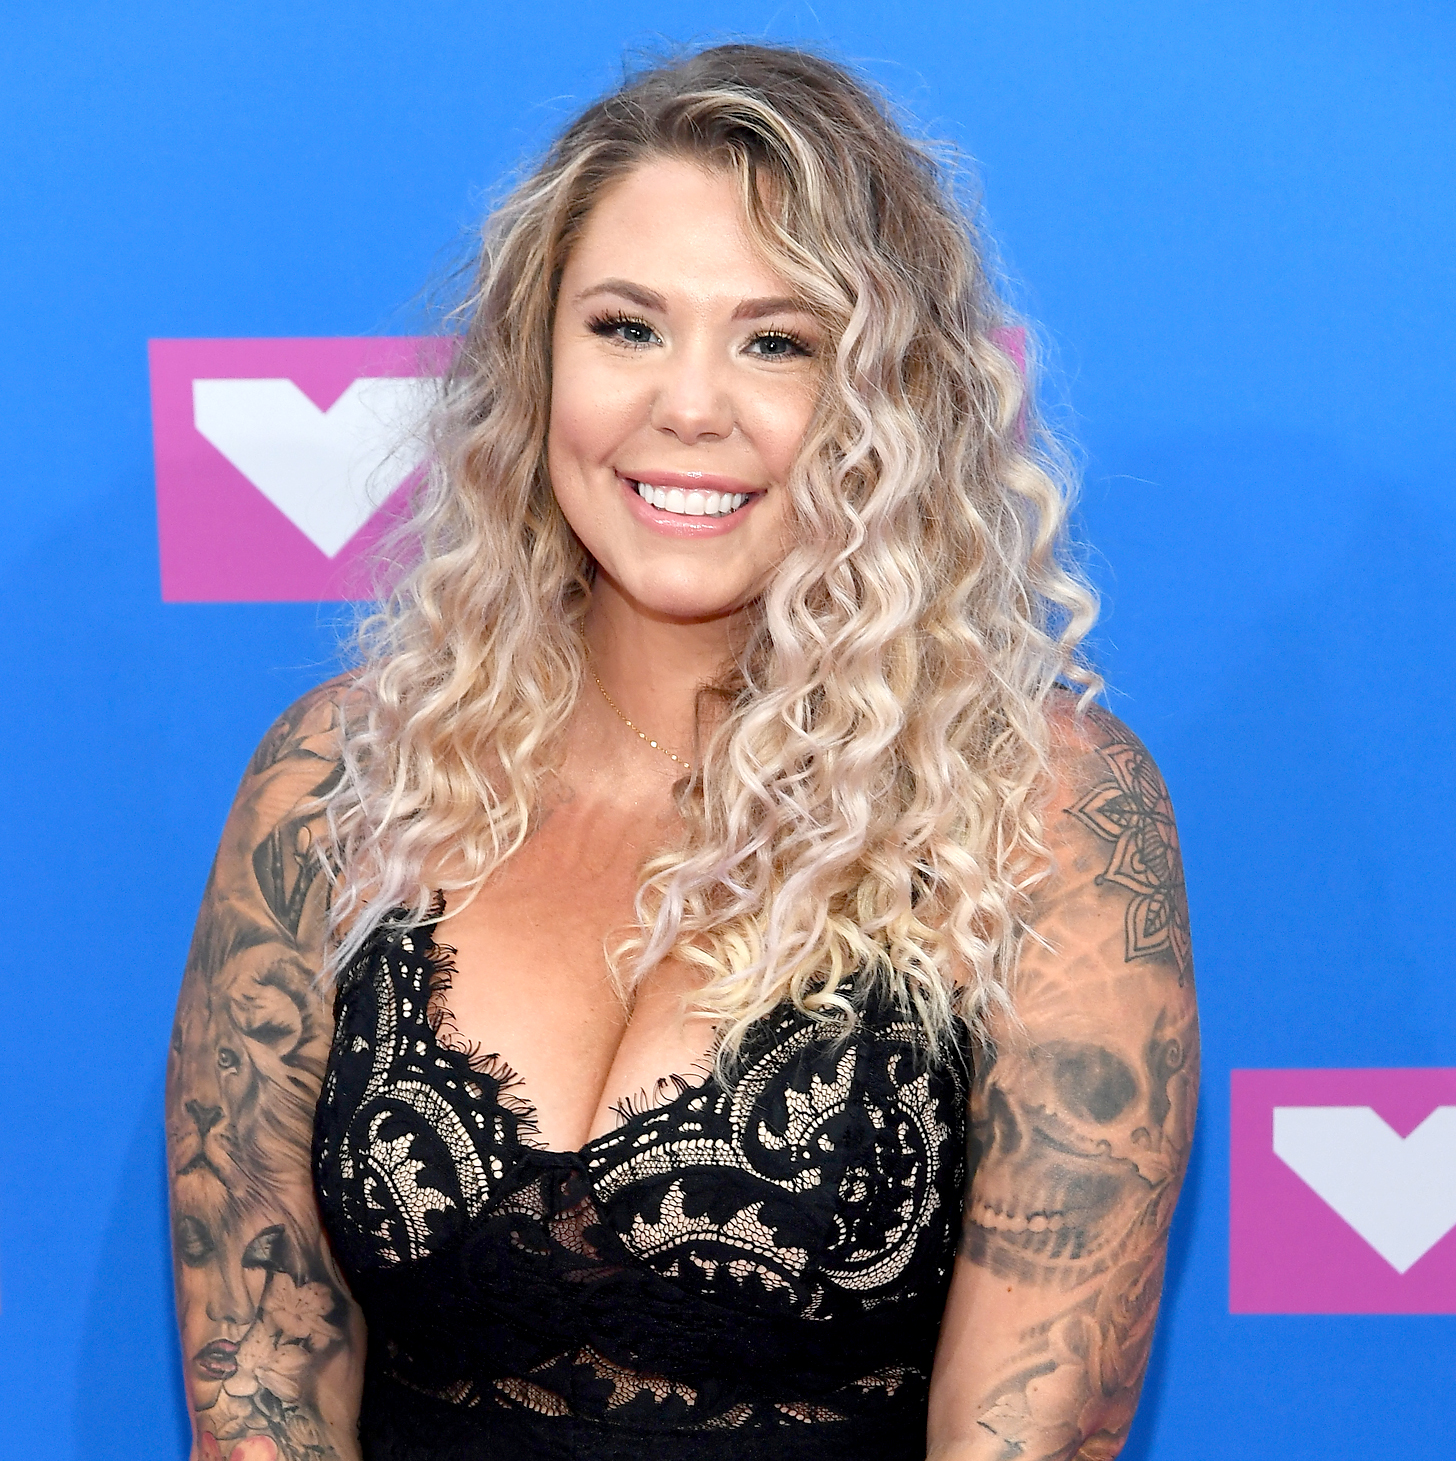 Kailyn--Lowry-Jenelle-Evans-fired-Teen-Mom-2